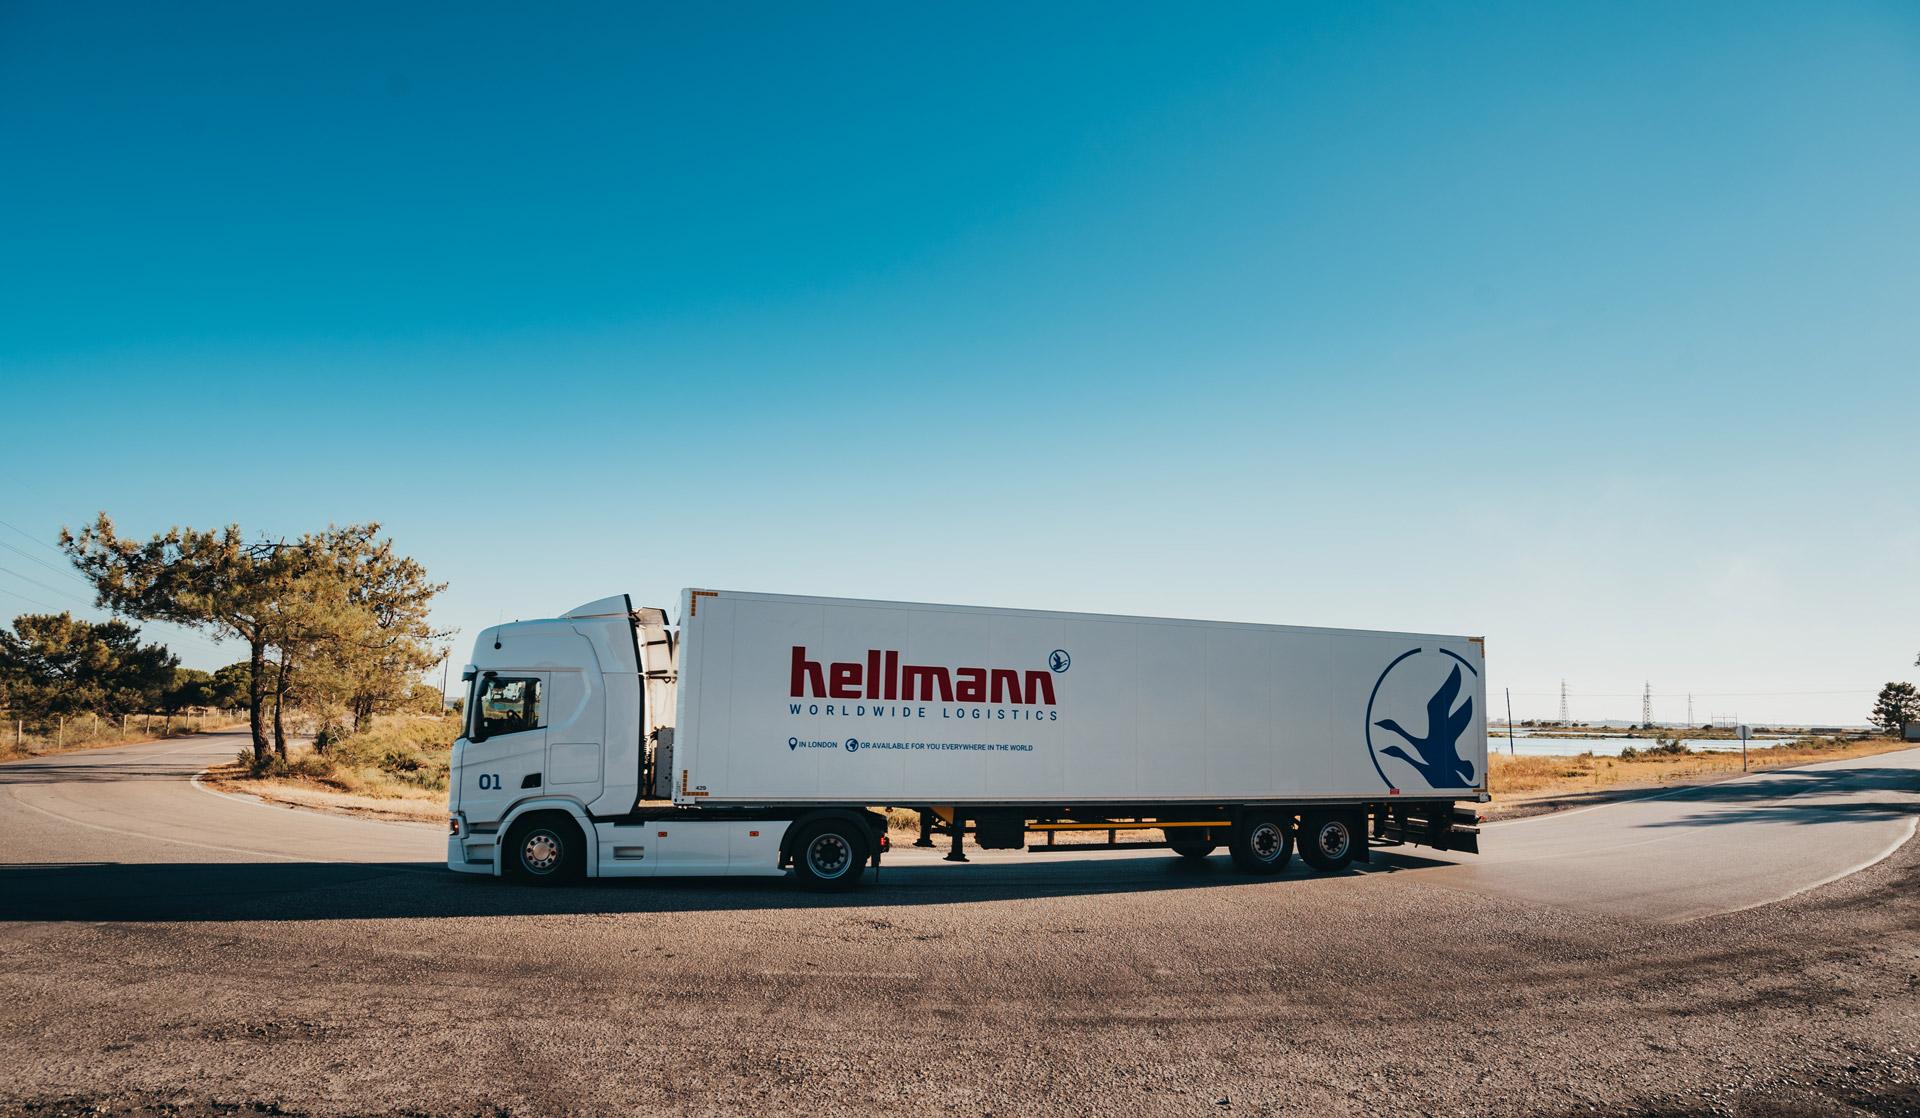 A Hellmann truck is parked on the road.